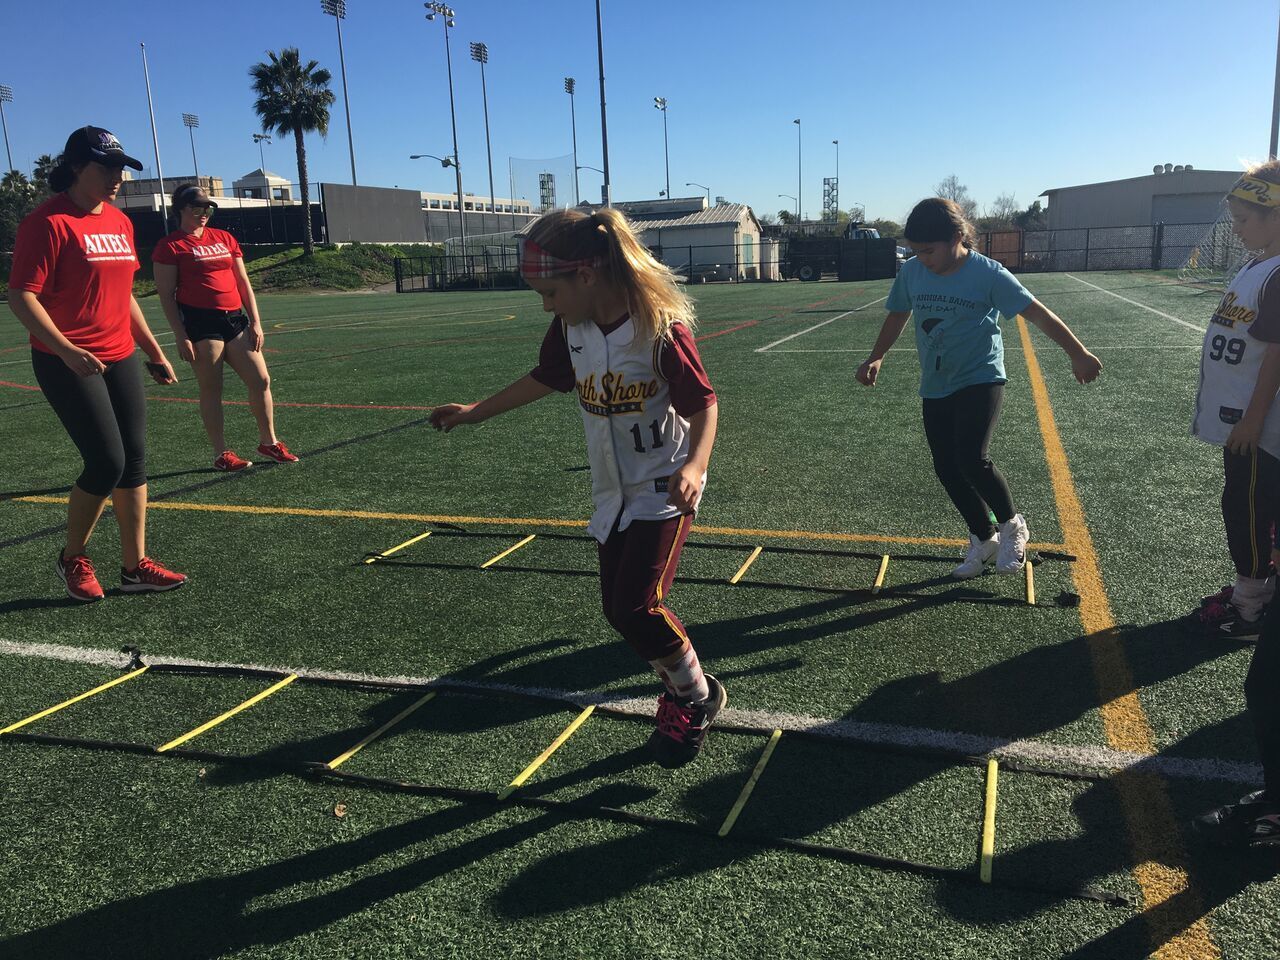 More than 50 girls participated in a variety of drills that were designed to develop and hone softball skill and technique.